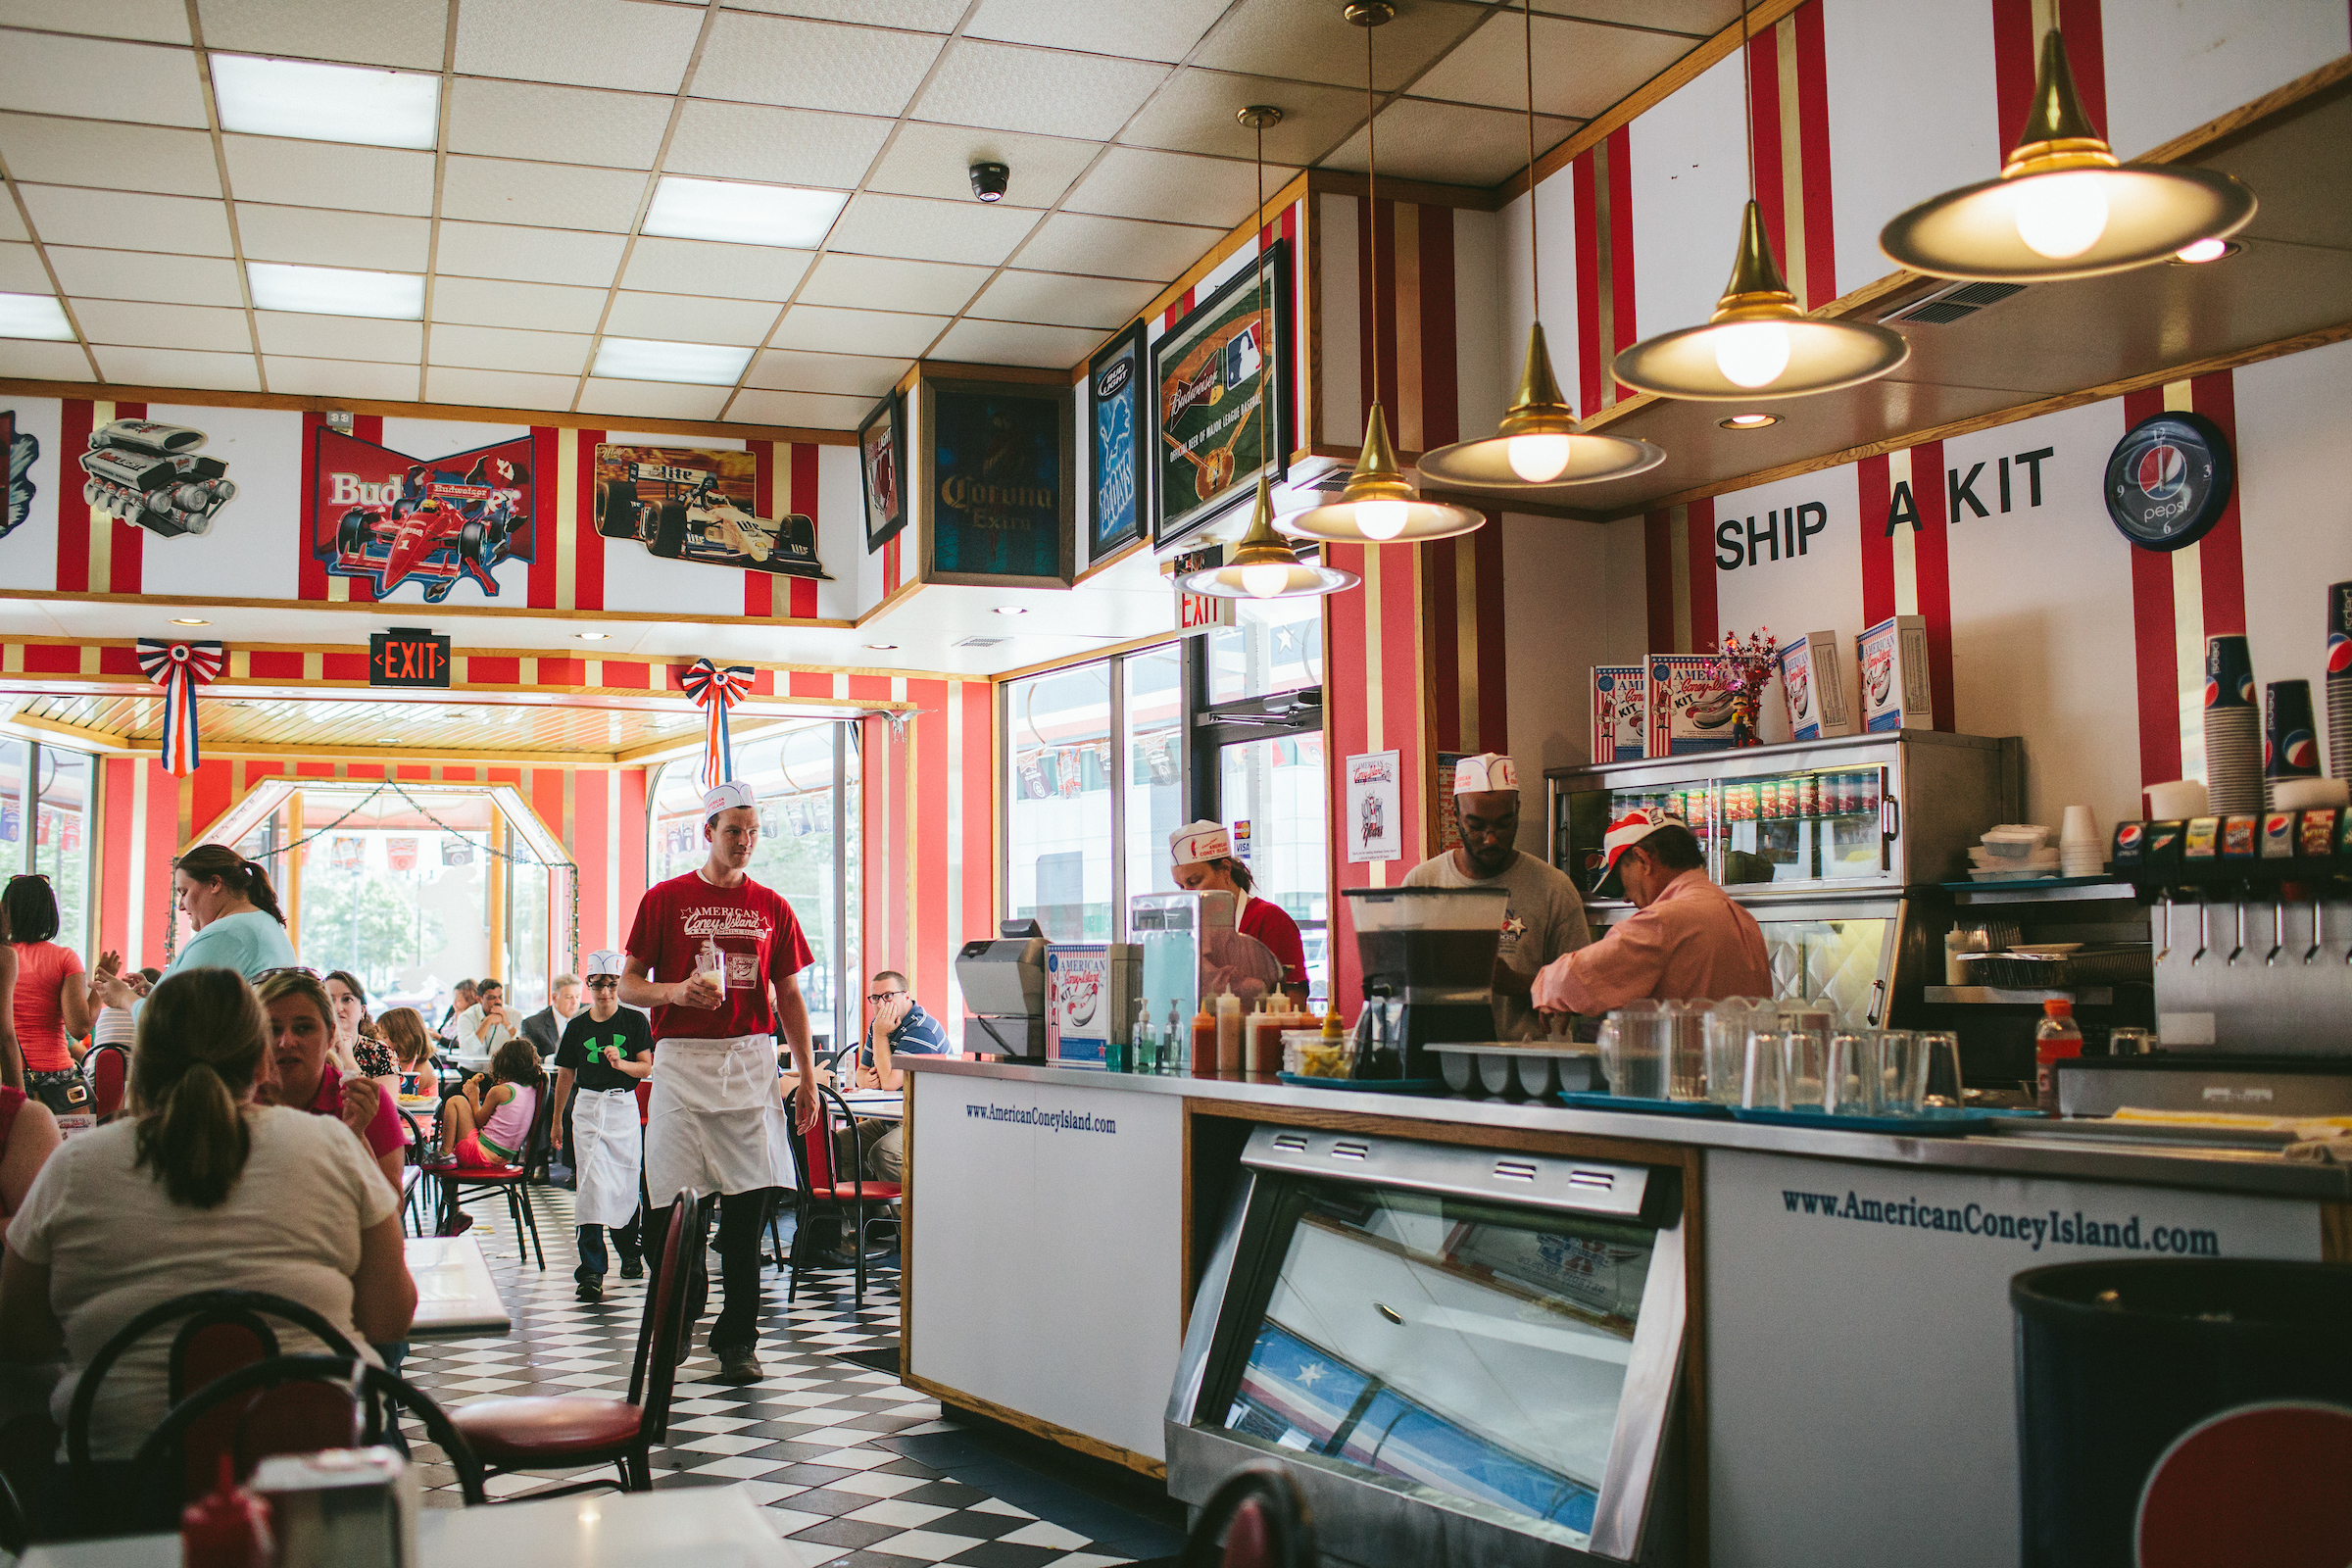 A server in a red T-shirt and apron walking through a full, retro style dining room at American Coney Island.